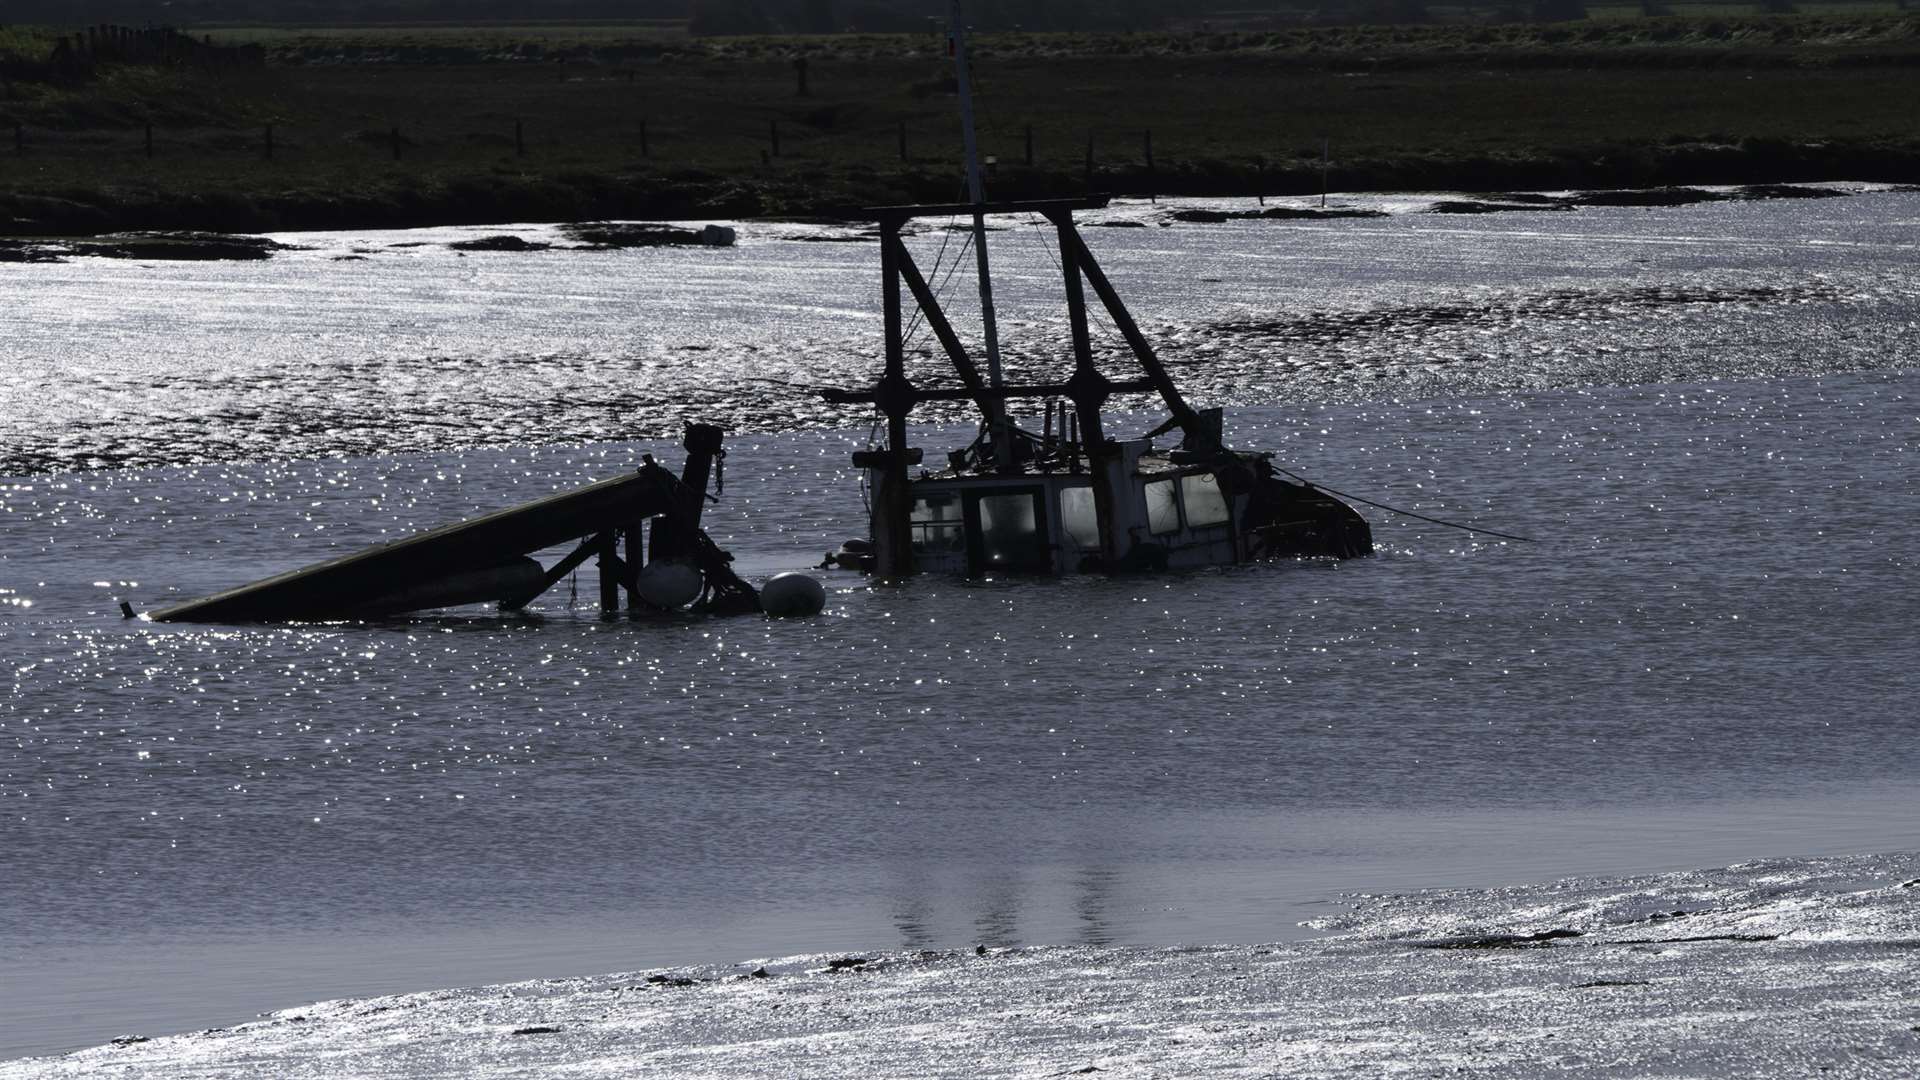 The boat has recently sunk in the Swale. Picture: Michael Maloney